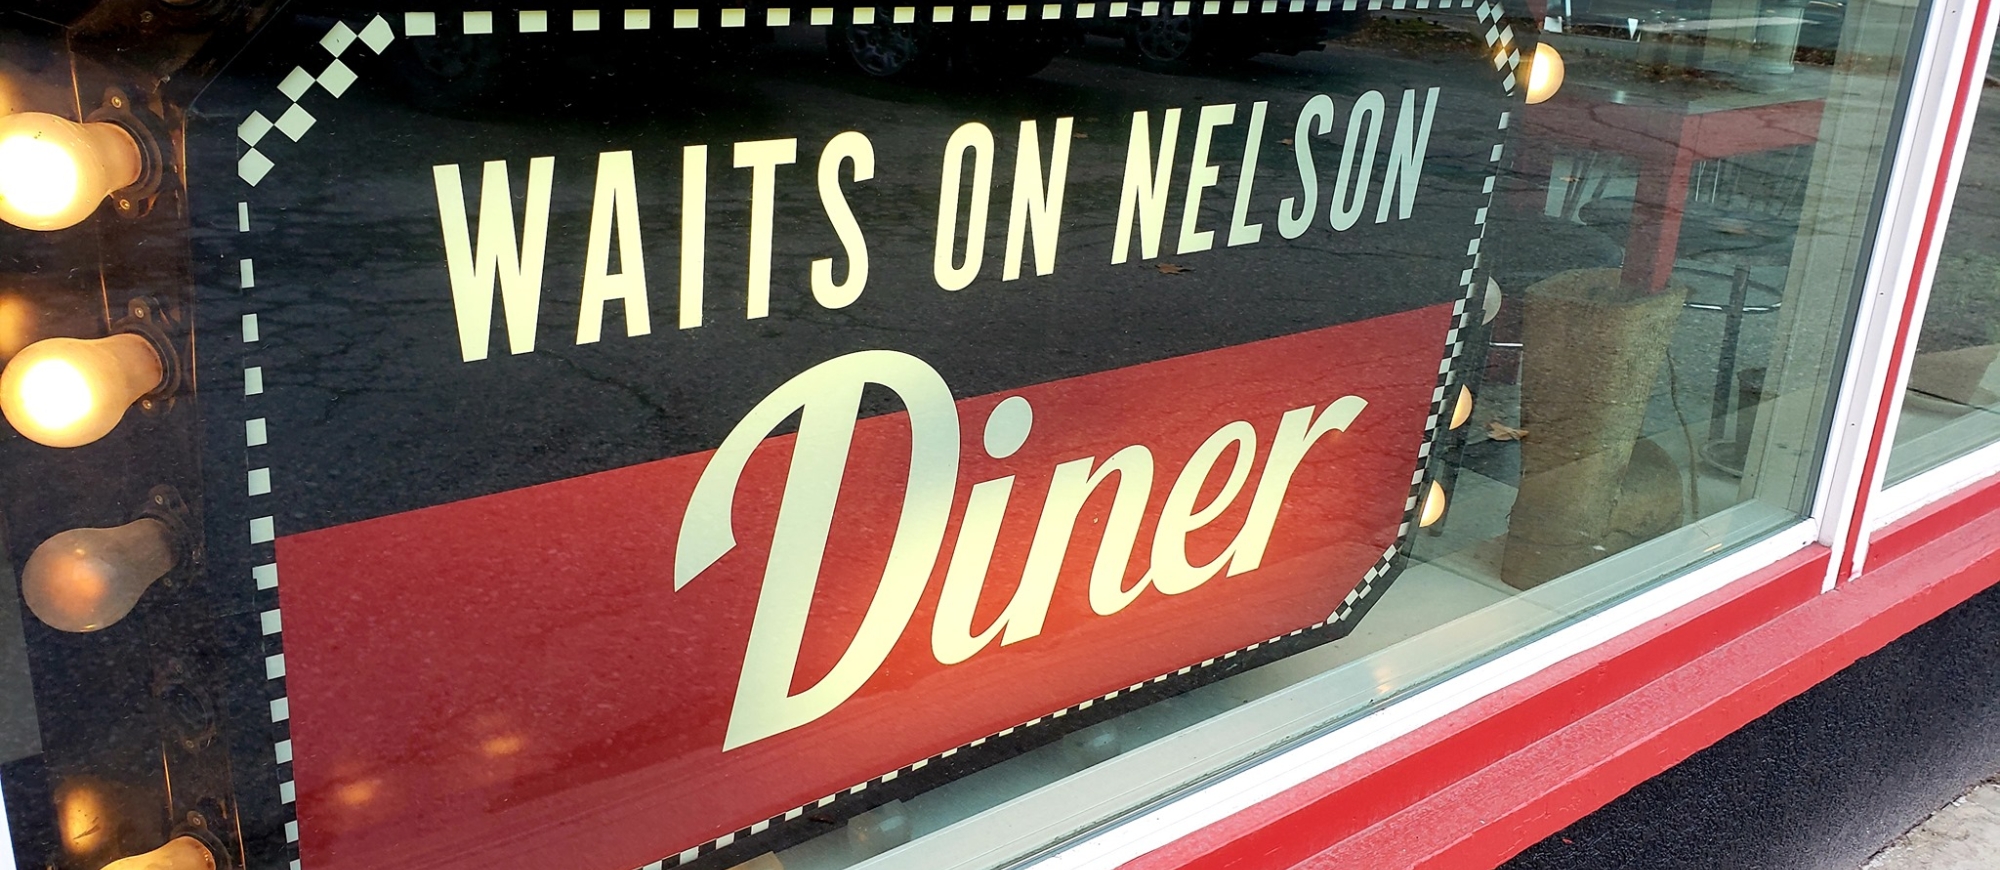 Wait's on Nelson Diner sign